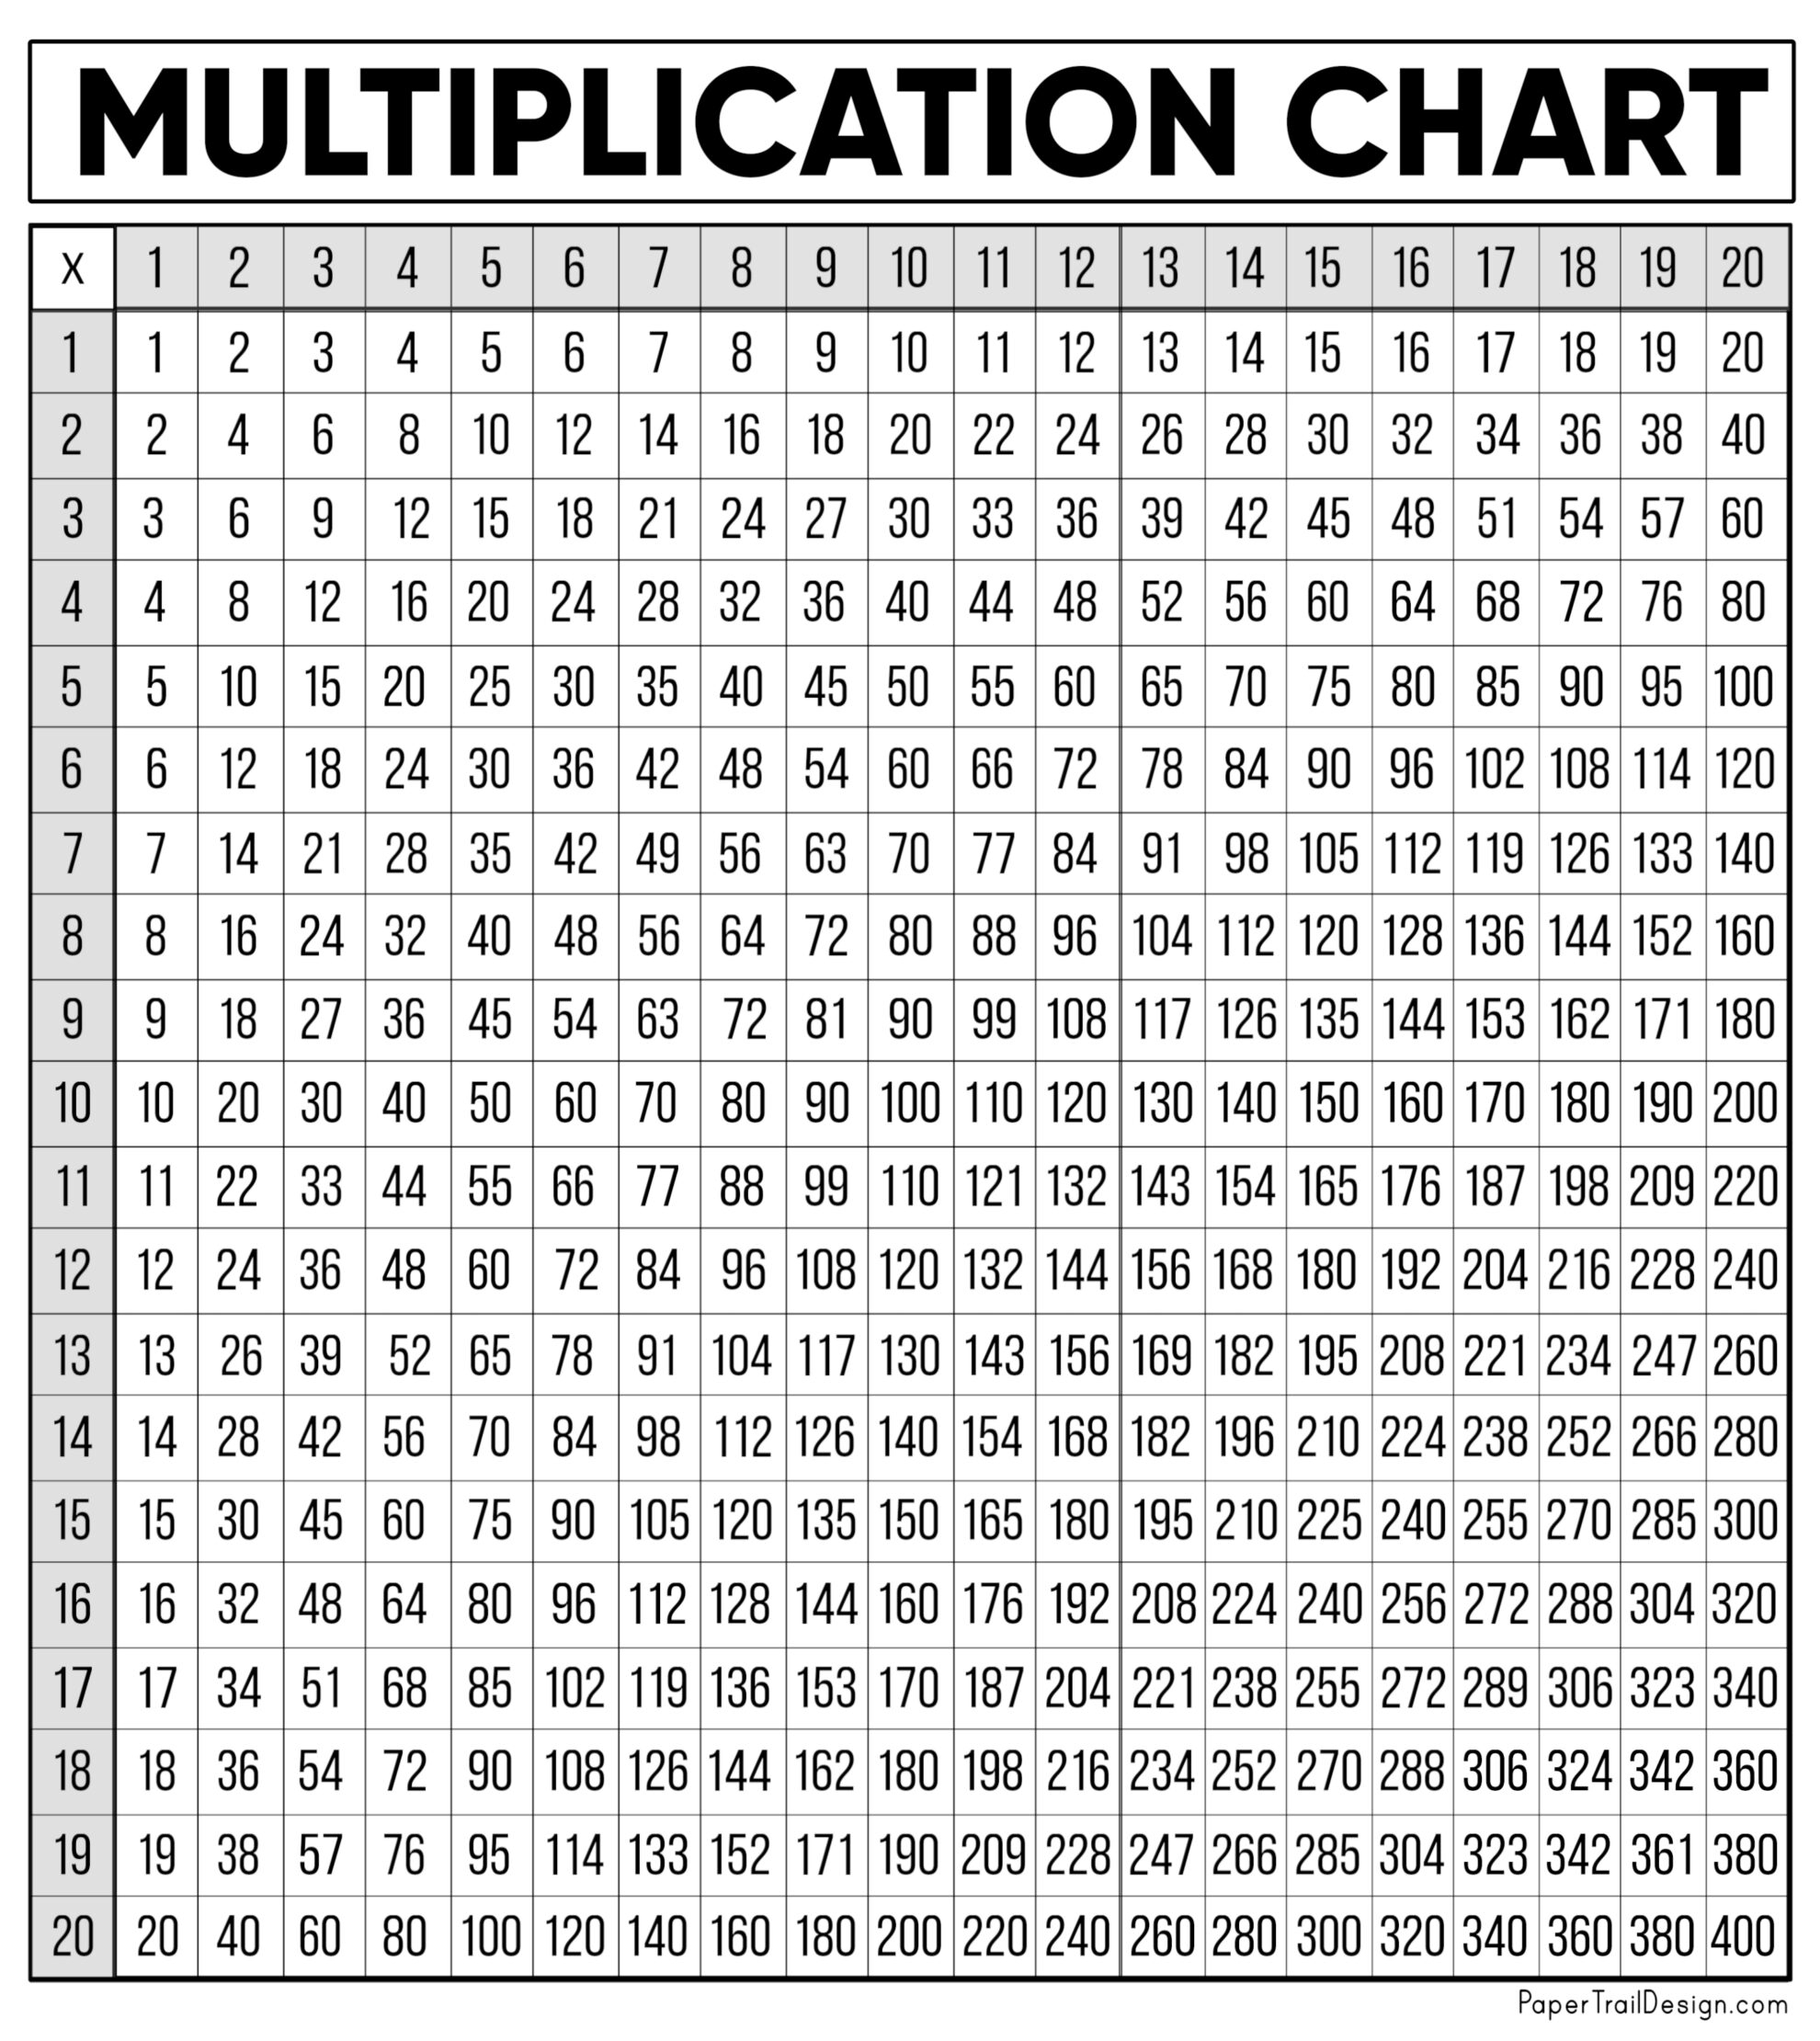 Free Multiplication Tables Print Out